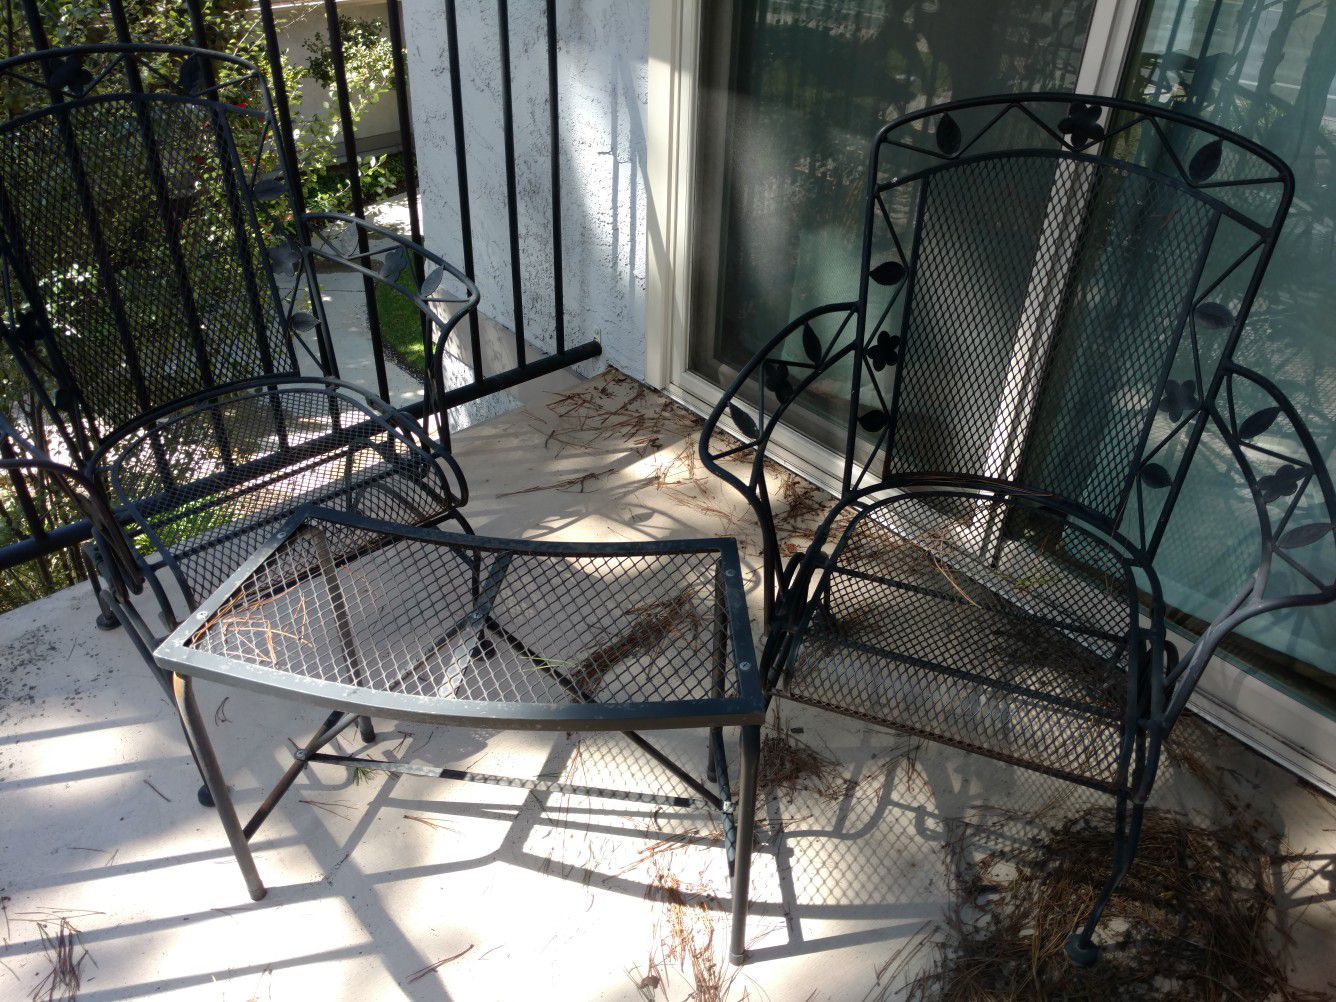 Patio furniture - chairs and table